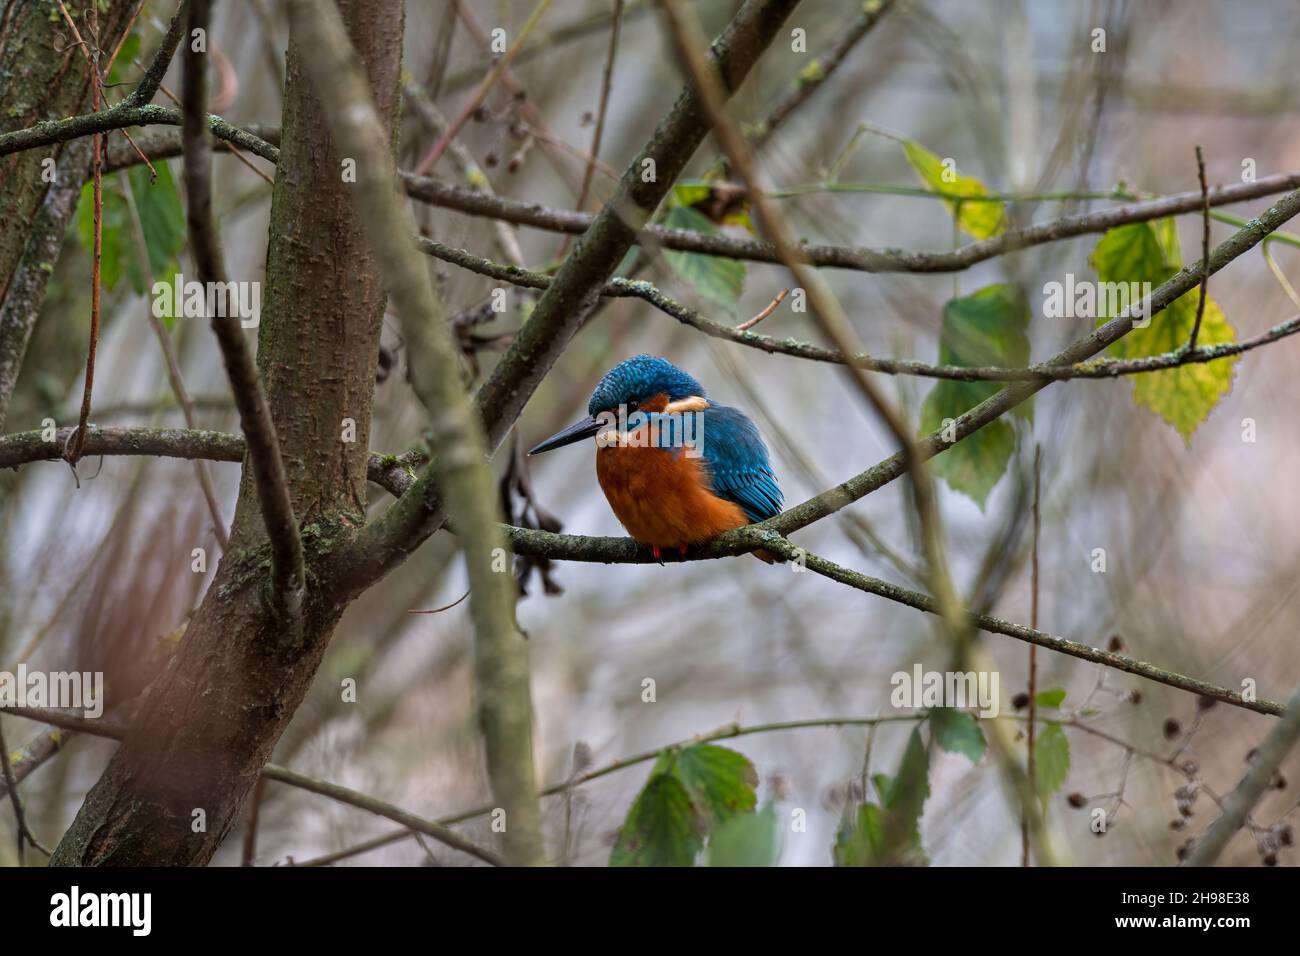 A common Kingfisher, Alcedo atthis, also known as the Eurasian kingfisher, or river Kingfisher perched on a branch by a pond. Stock Photo